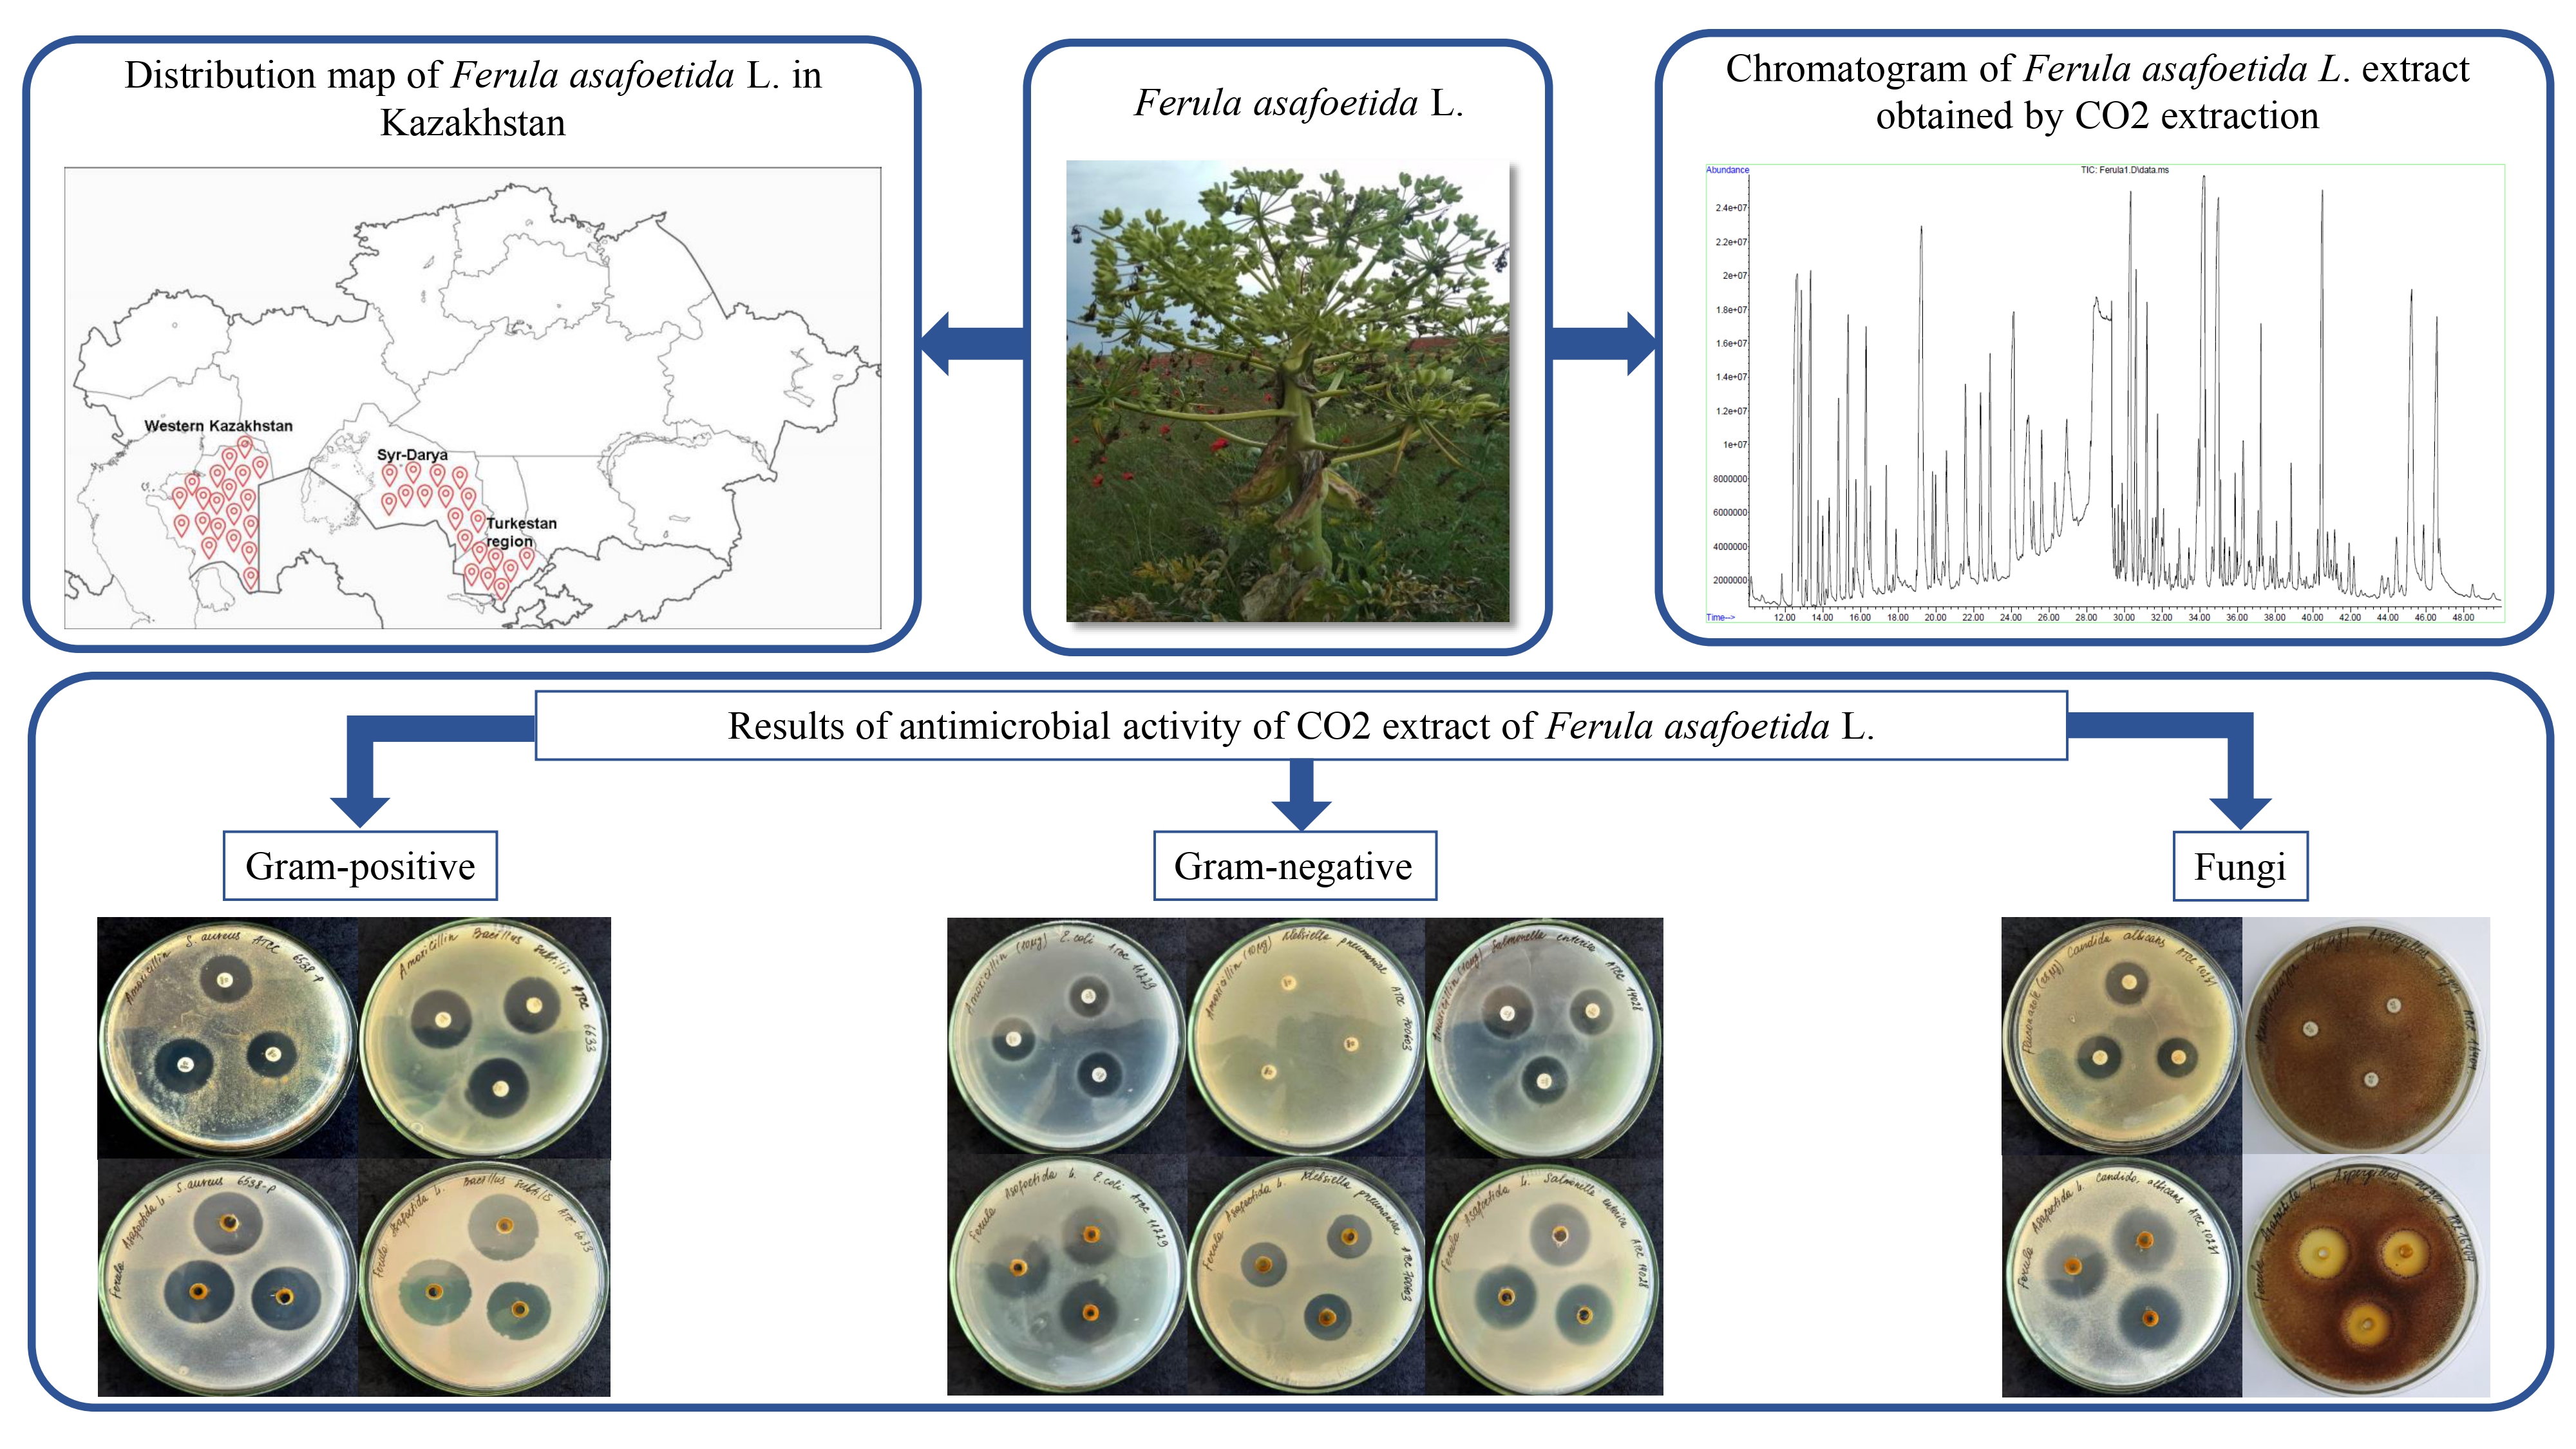 Component composition and antimicrobial activity of subcritical CO2 extract of Ferula asafoetida L., growing in the territory of Kazakhstan